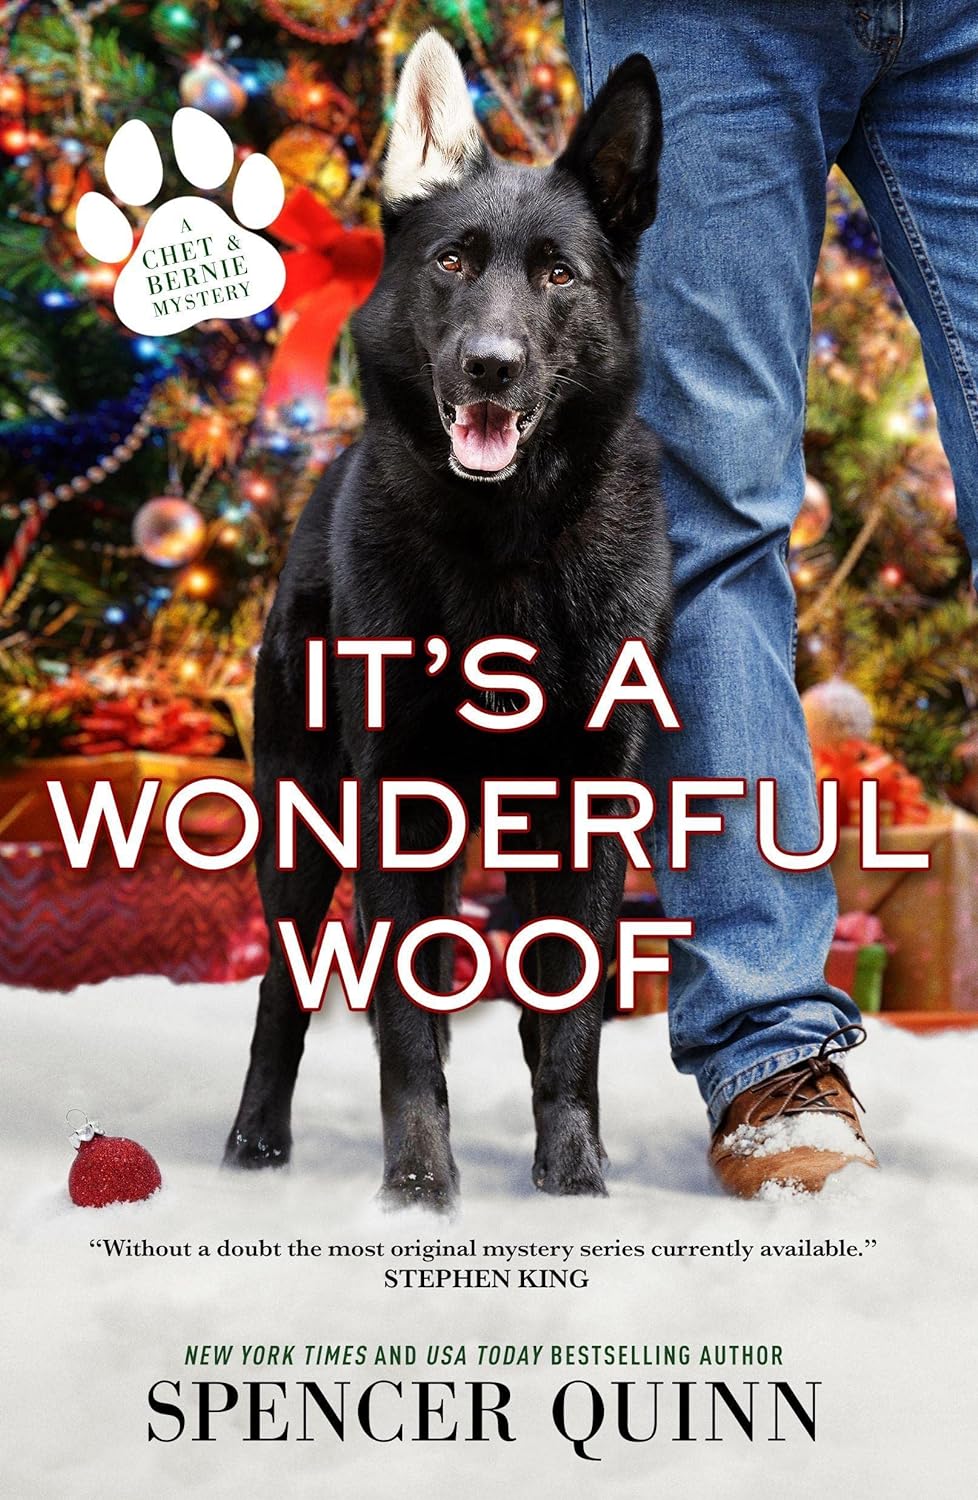 Image for "It's a Wonderful Woof: A Chet & Bernie Mystery"